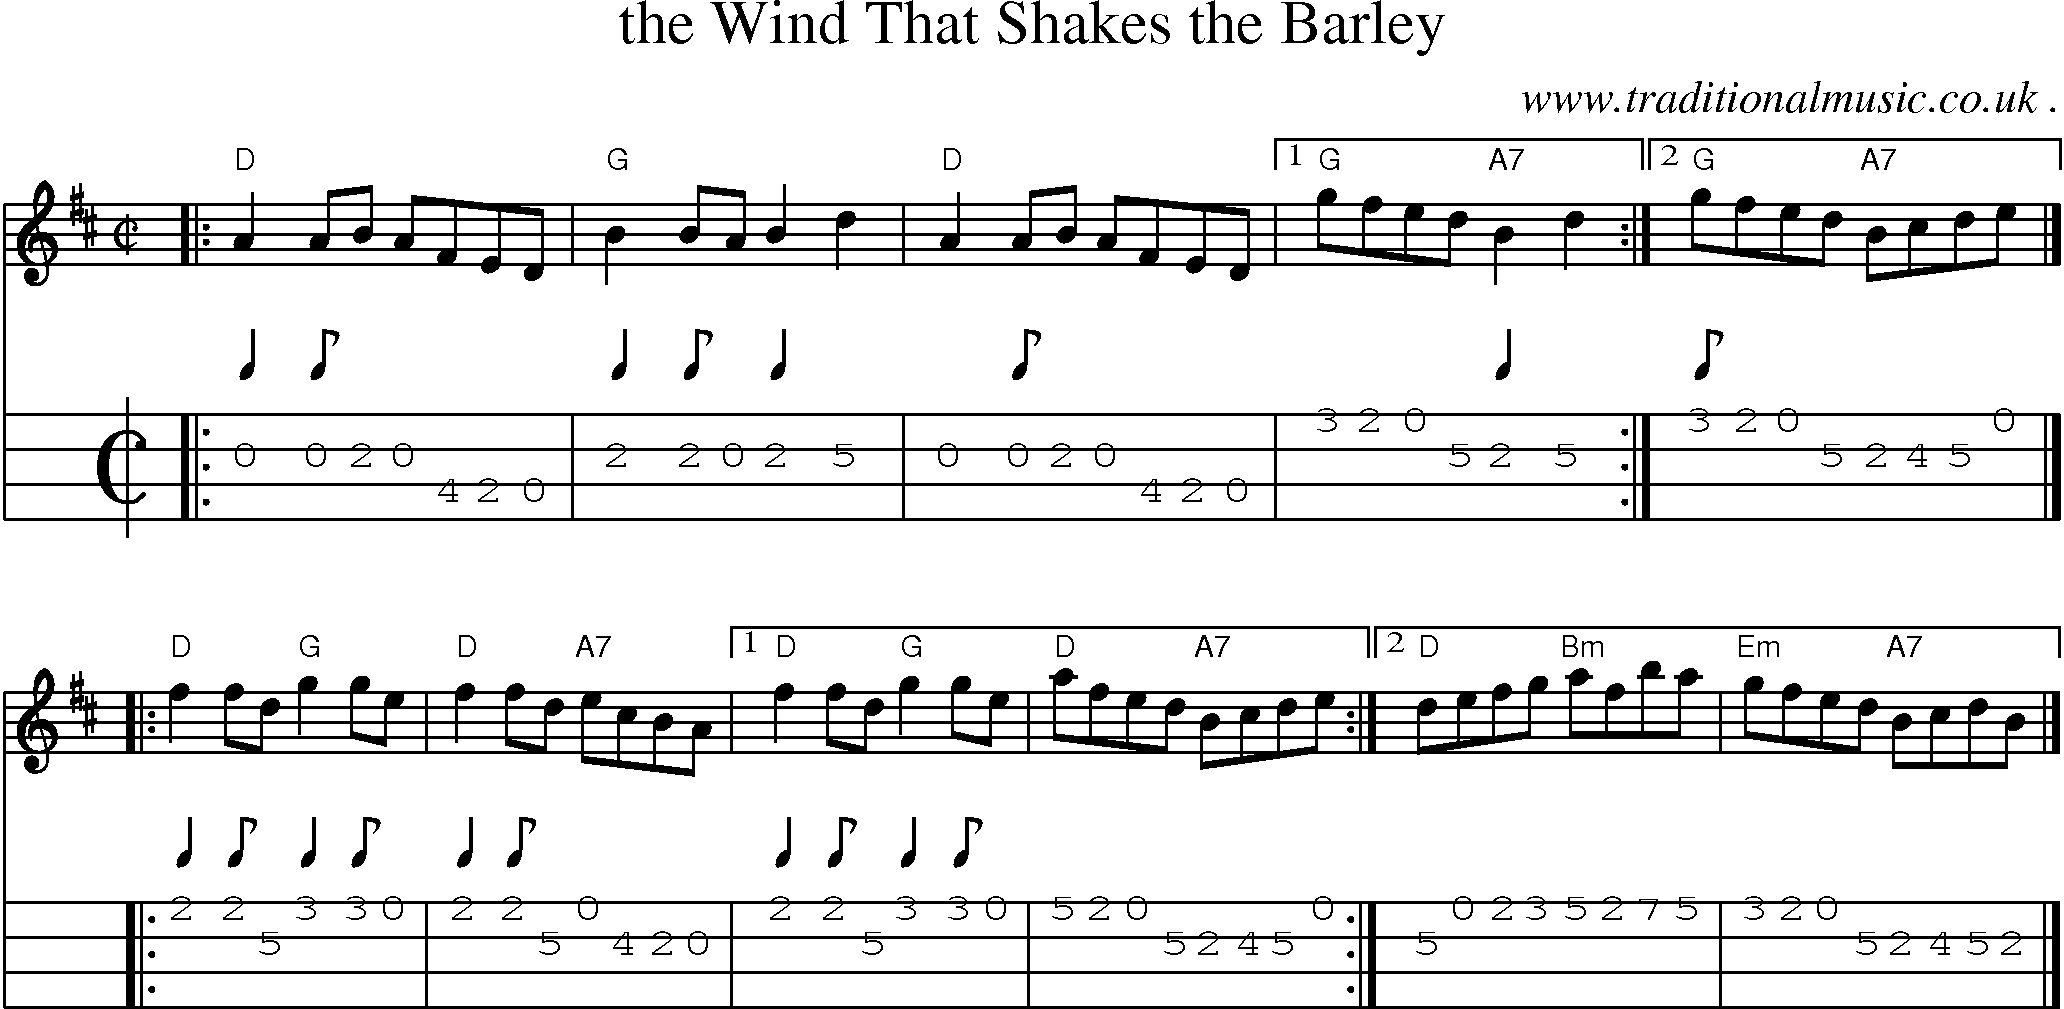 Sheet-music  score, Chords and Mandolin Tabs for The Wind That Shakes The Barley